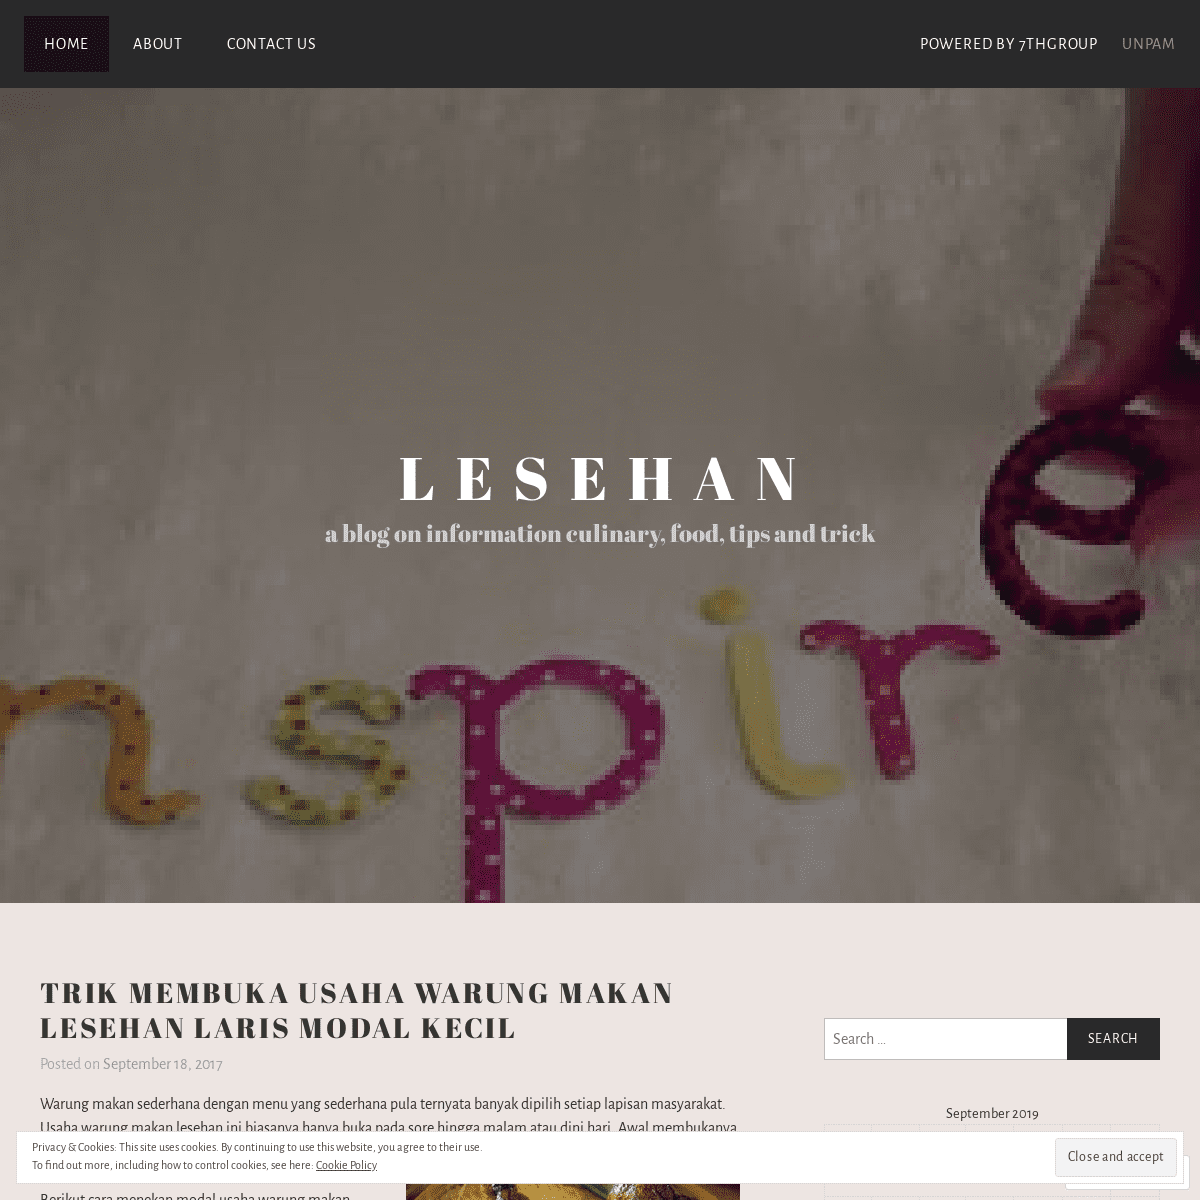 L E S E H A N – a blog on information culinary, food, tips and trick